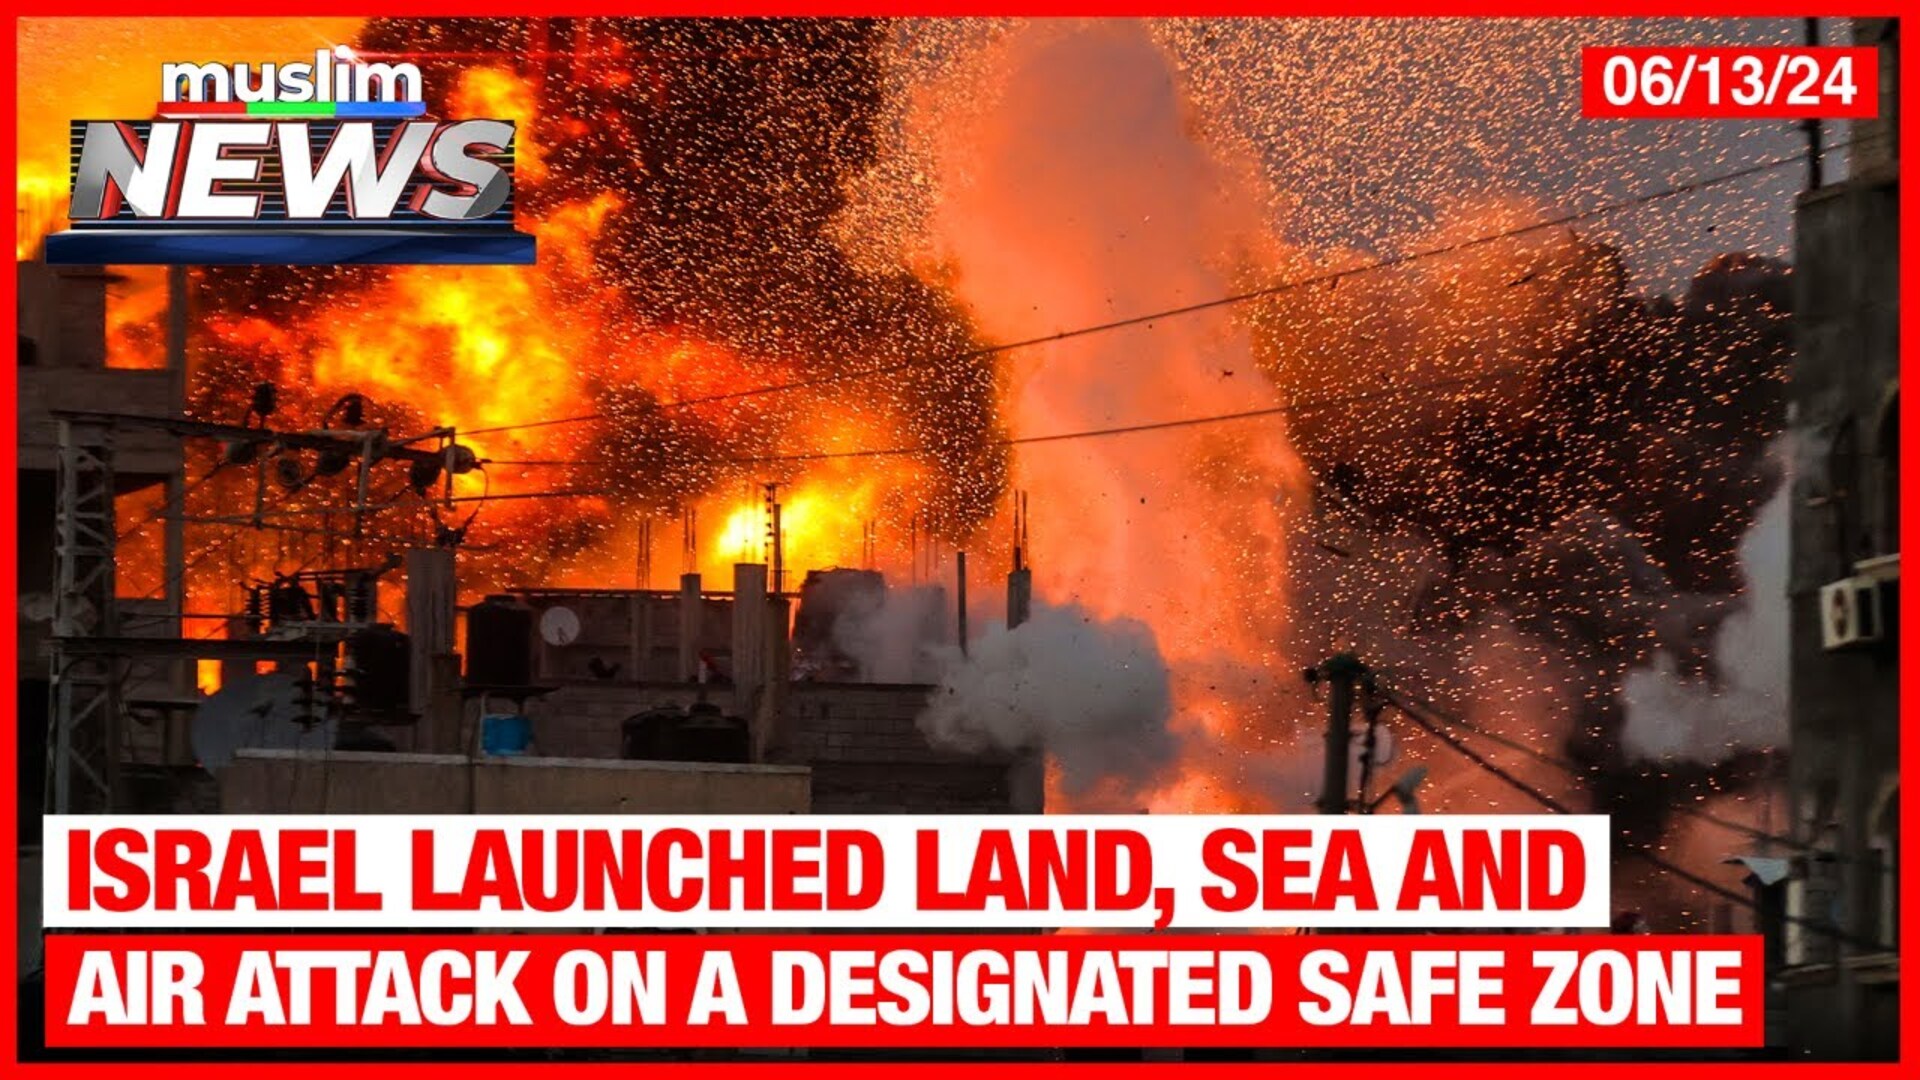 Israel Launched Land, Sea And Air Attack On A Designated Safe Zone | Muslim News | Jun 13, 2024